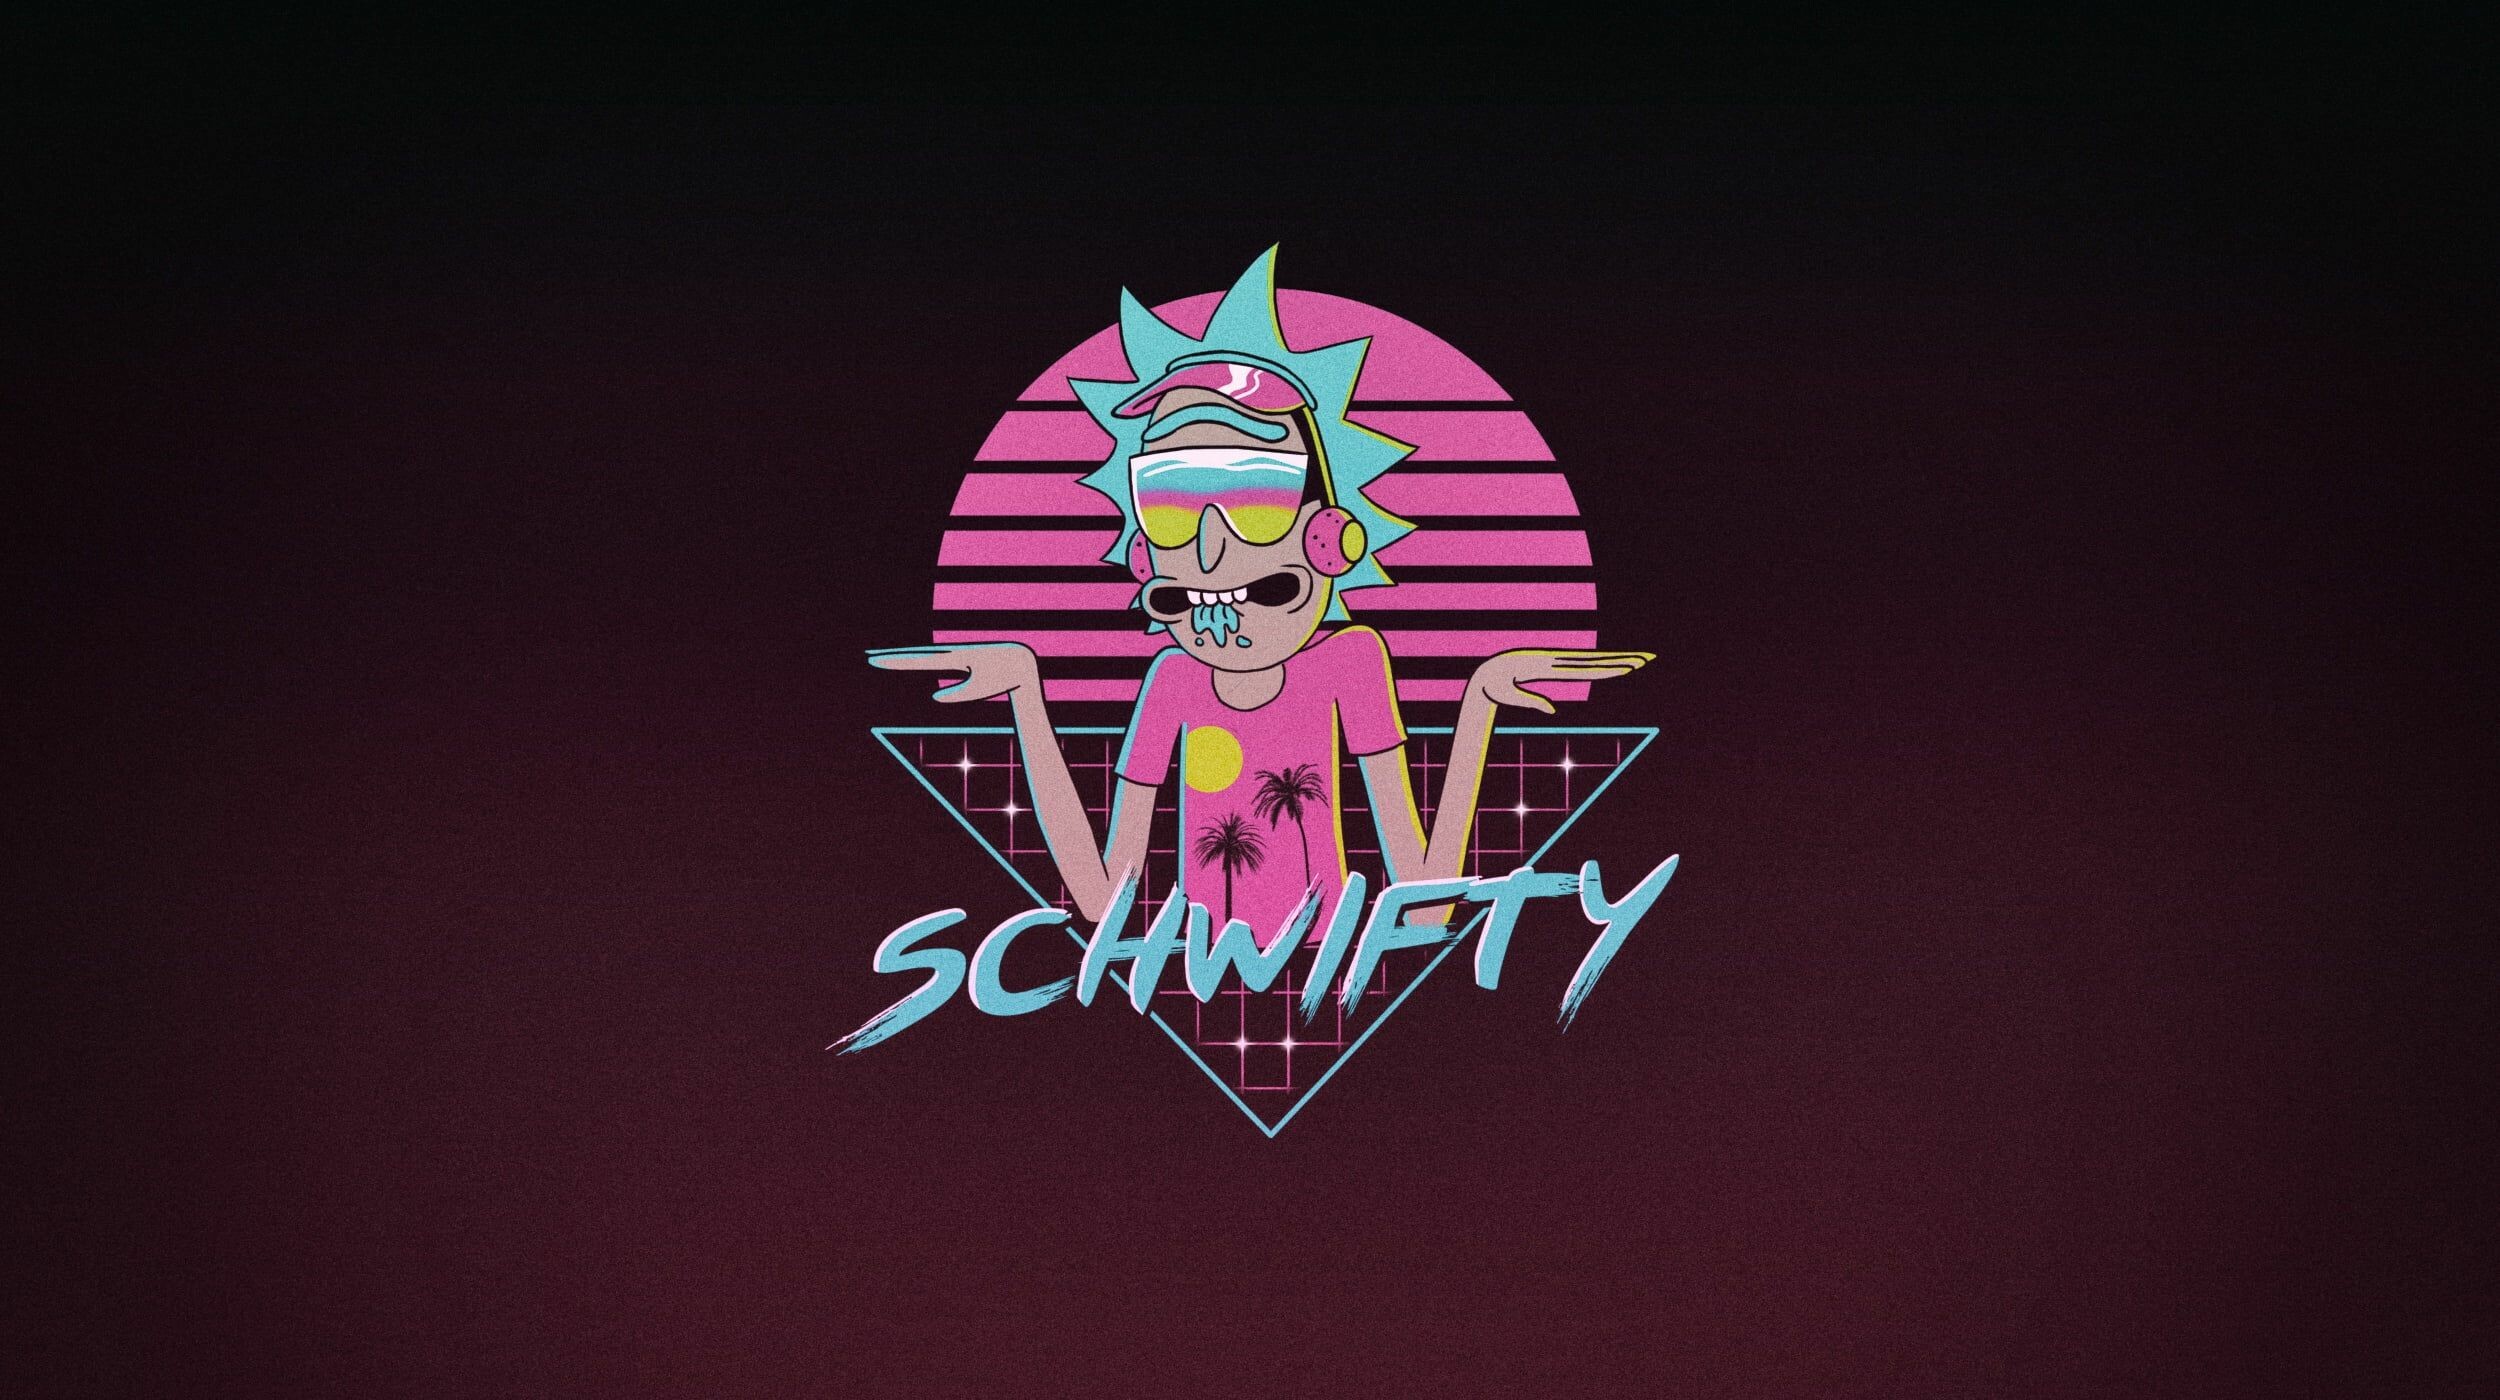 Rick and Morty: Schifty, Sanchez, an eccentric and alcoholic mad scientist. 2500x1400 HD Wallpaper.